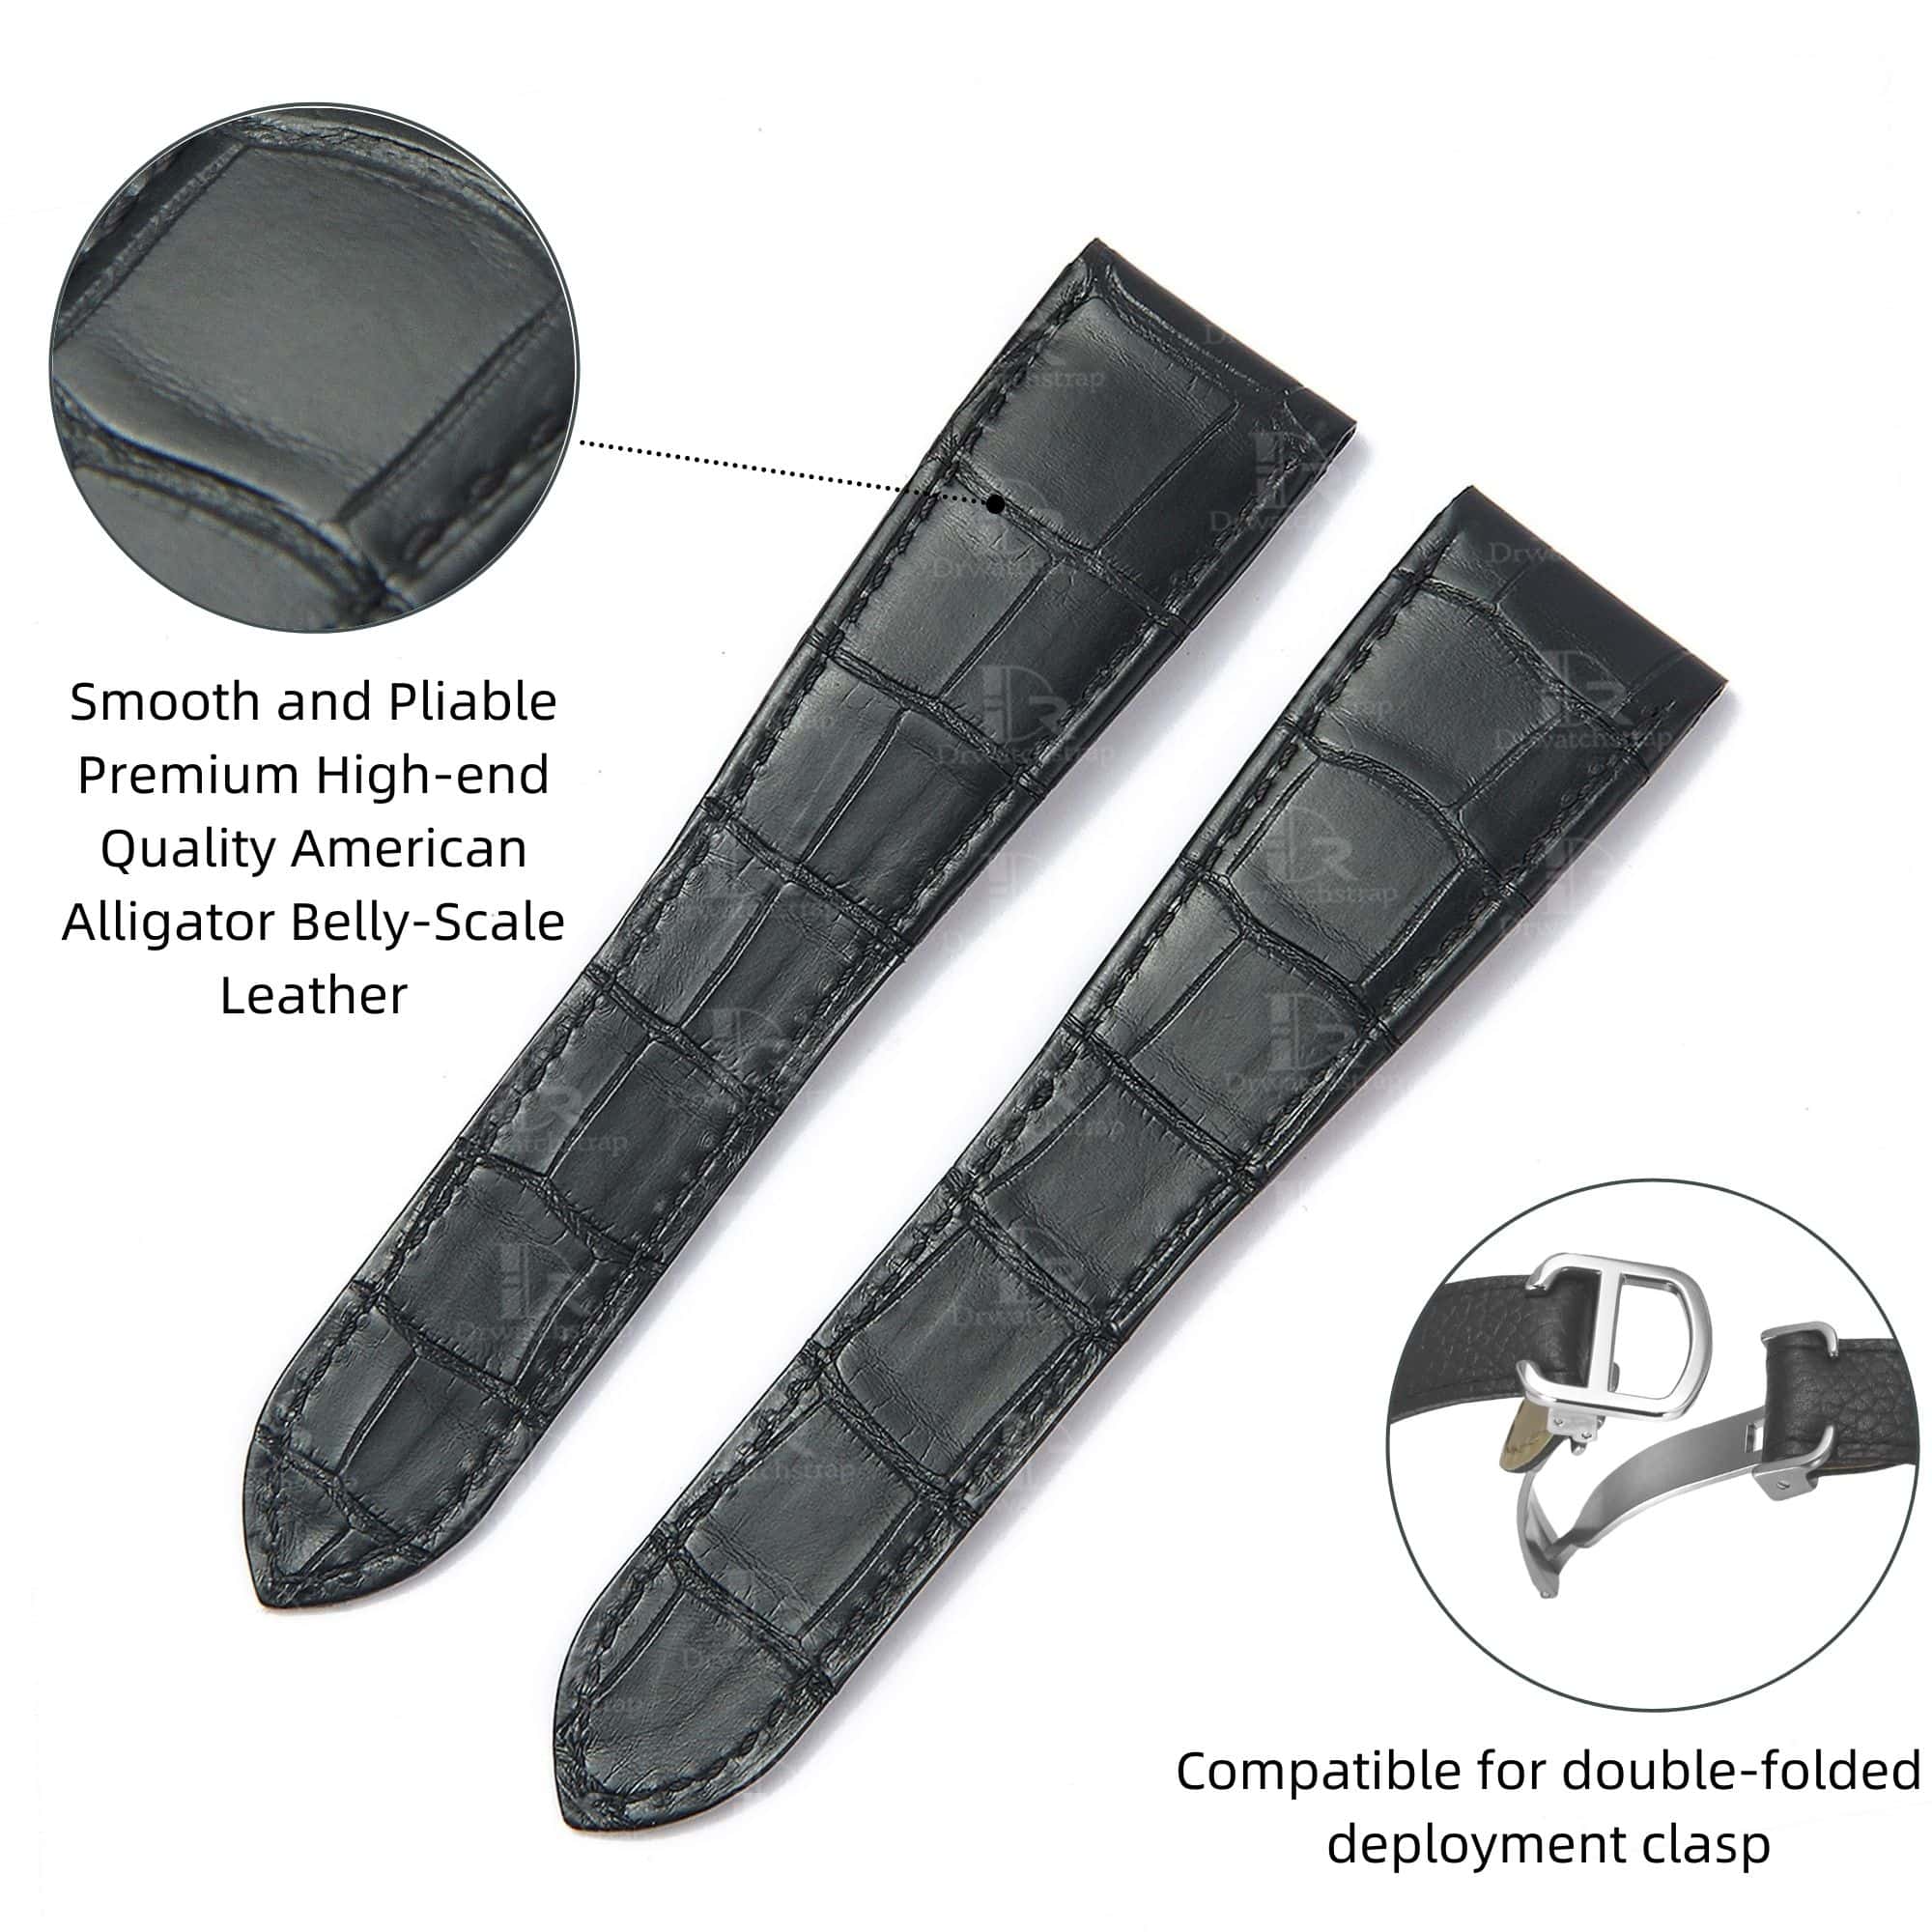 Best quality OEM high-end replacement black alligator crocodile leather Cartier Calibre watch strap and watch band for Cartier Calibre dive watches online - Aftermarket leather watchbands for Cartier Calibre at a low price